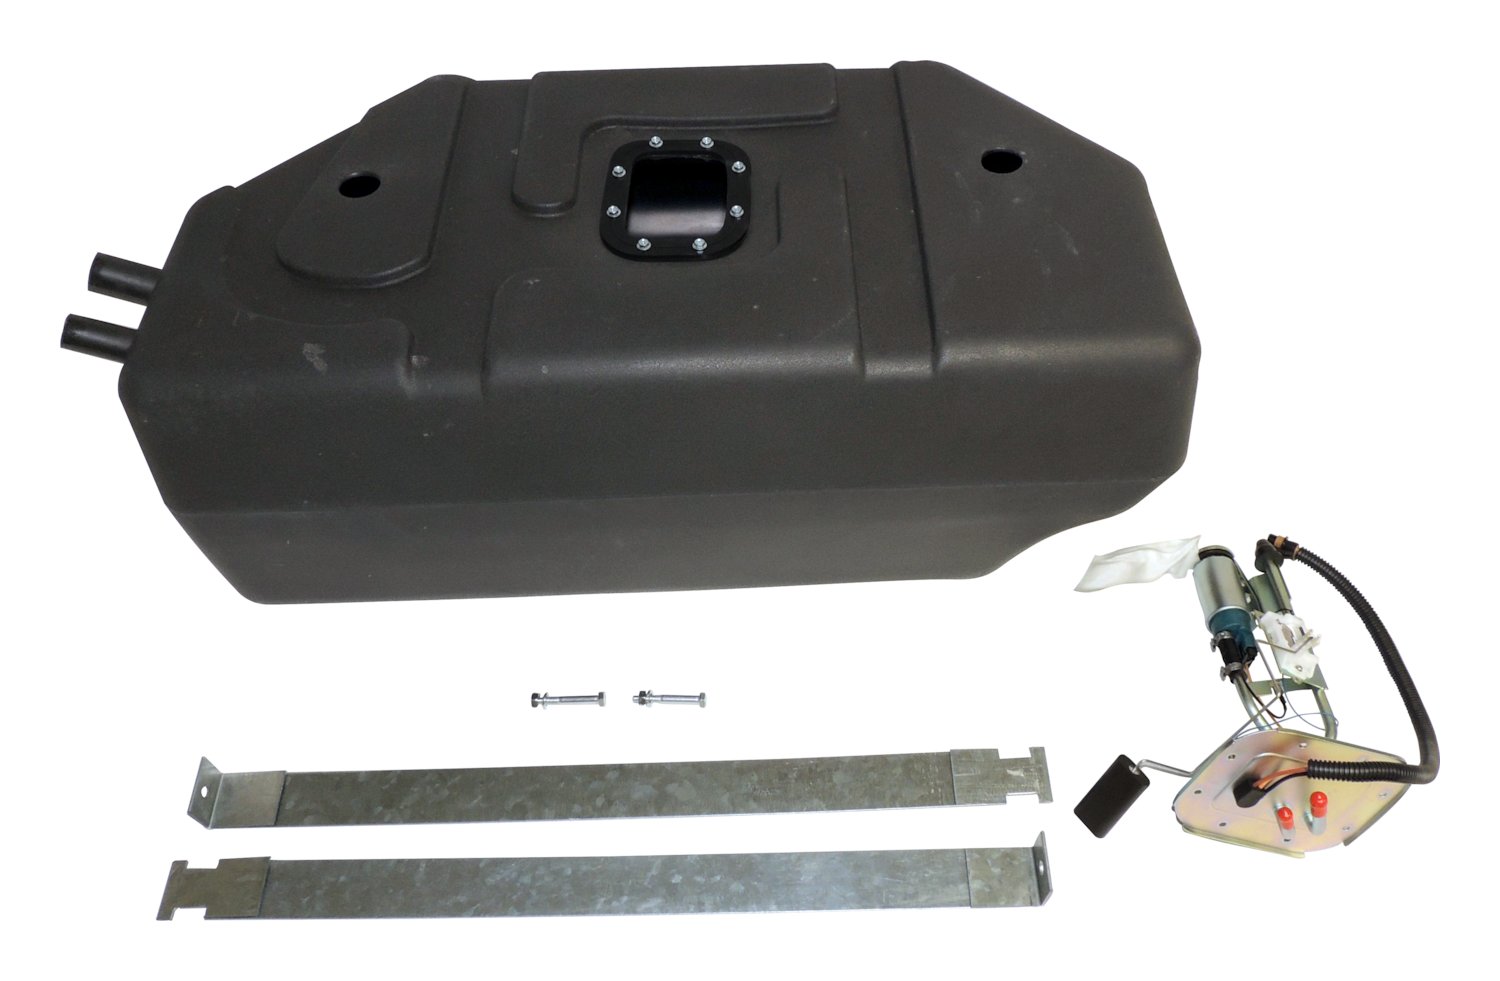 Crown Automotive Jeep Replacement RT22002 Fuel Tank Kit for 1991-1995 Jeep YJ Wrangler w/ 20 Gallon Tank